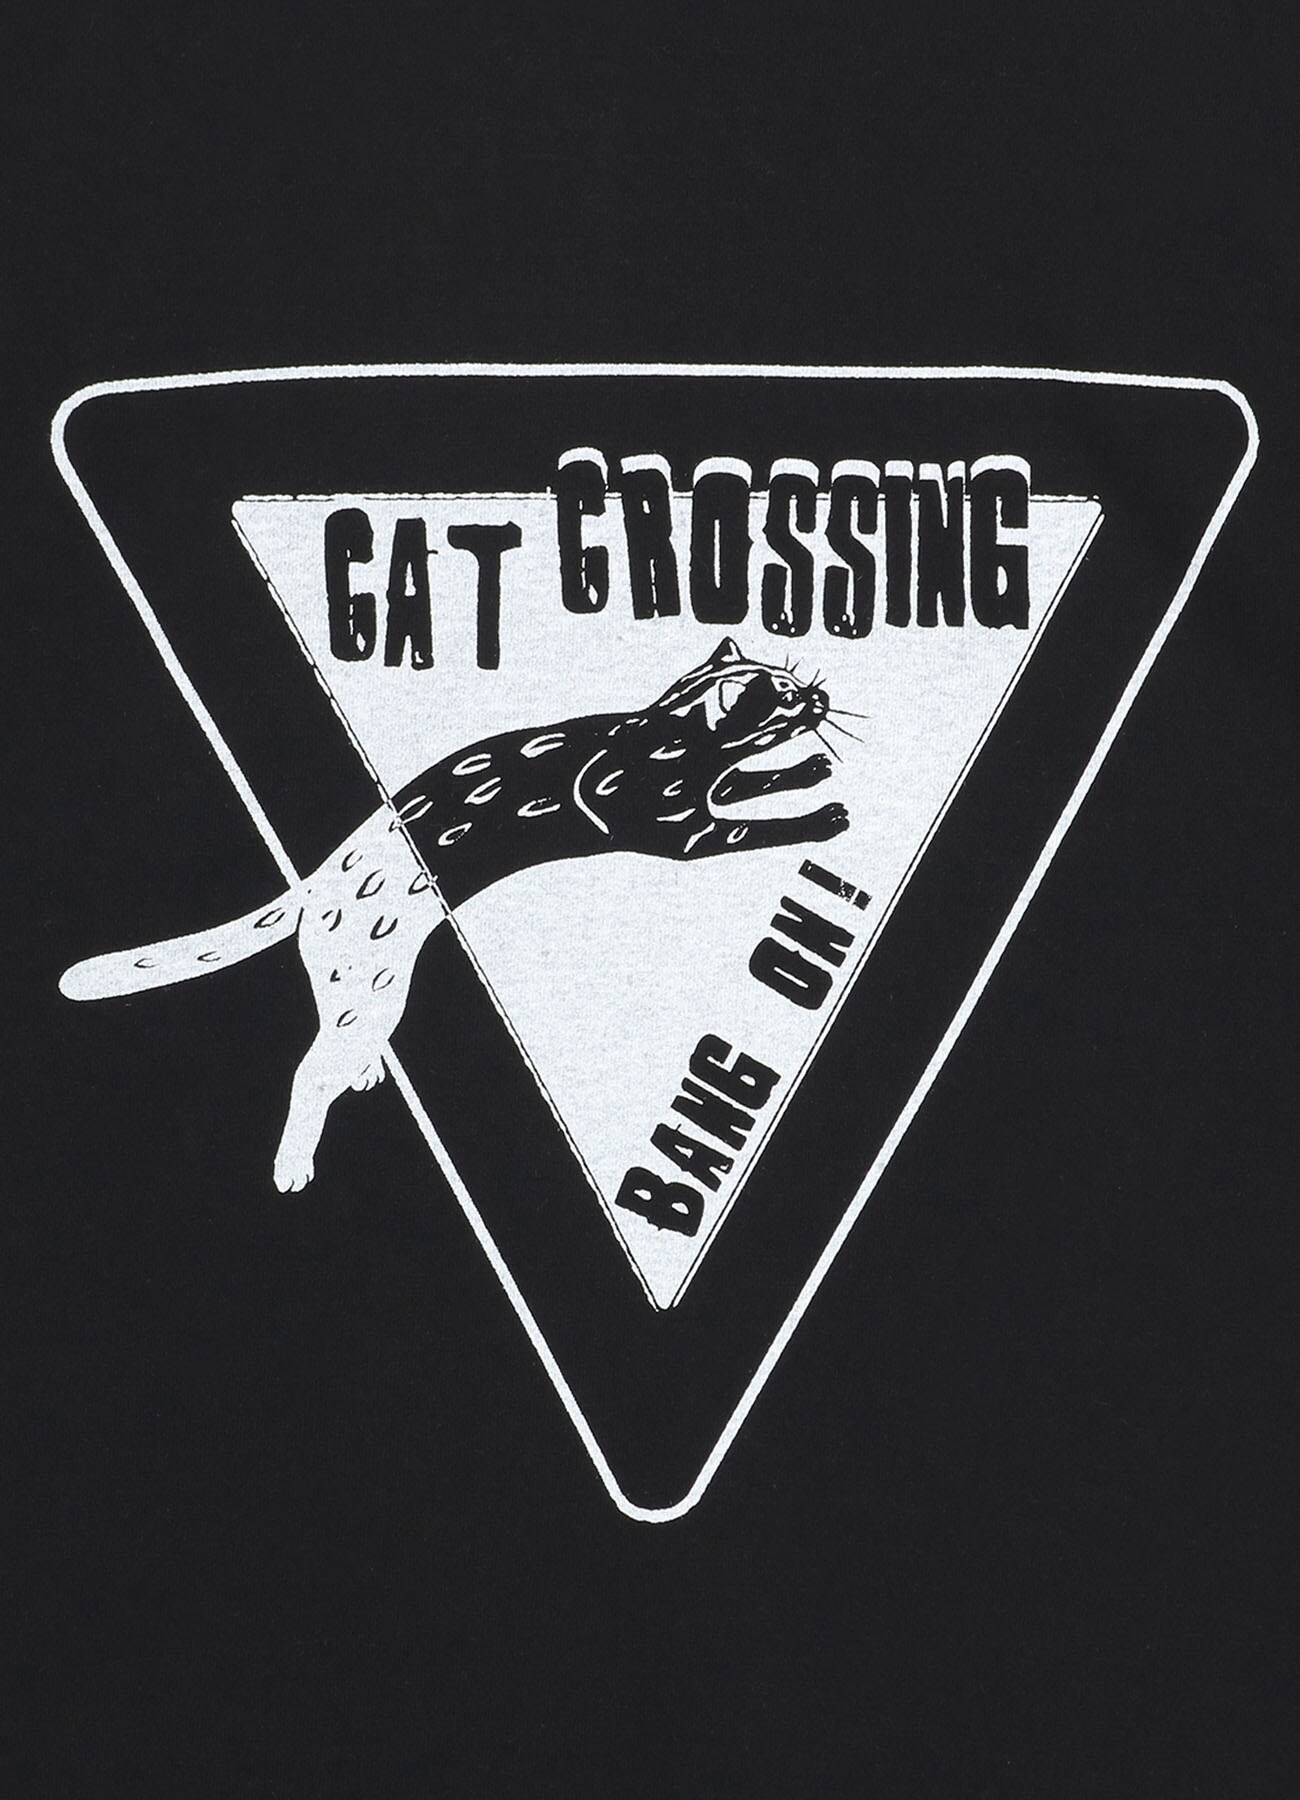 Y's BANG ON!ROAD SIGN T-Shirt CAT CROSSING